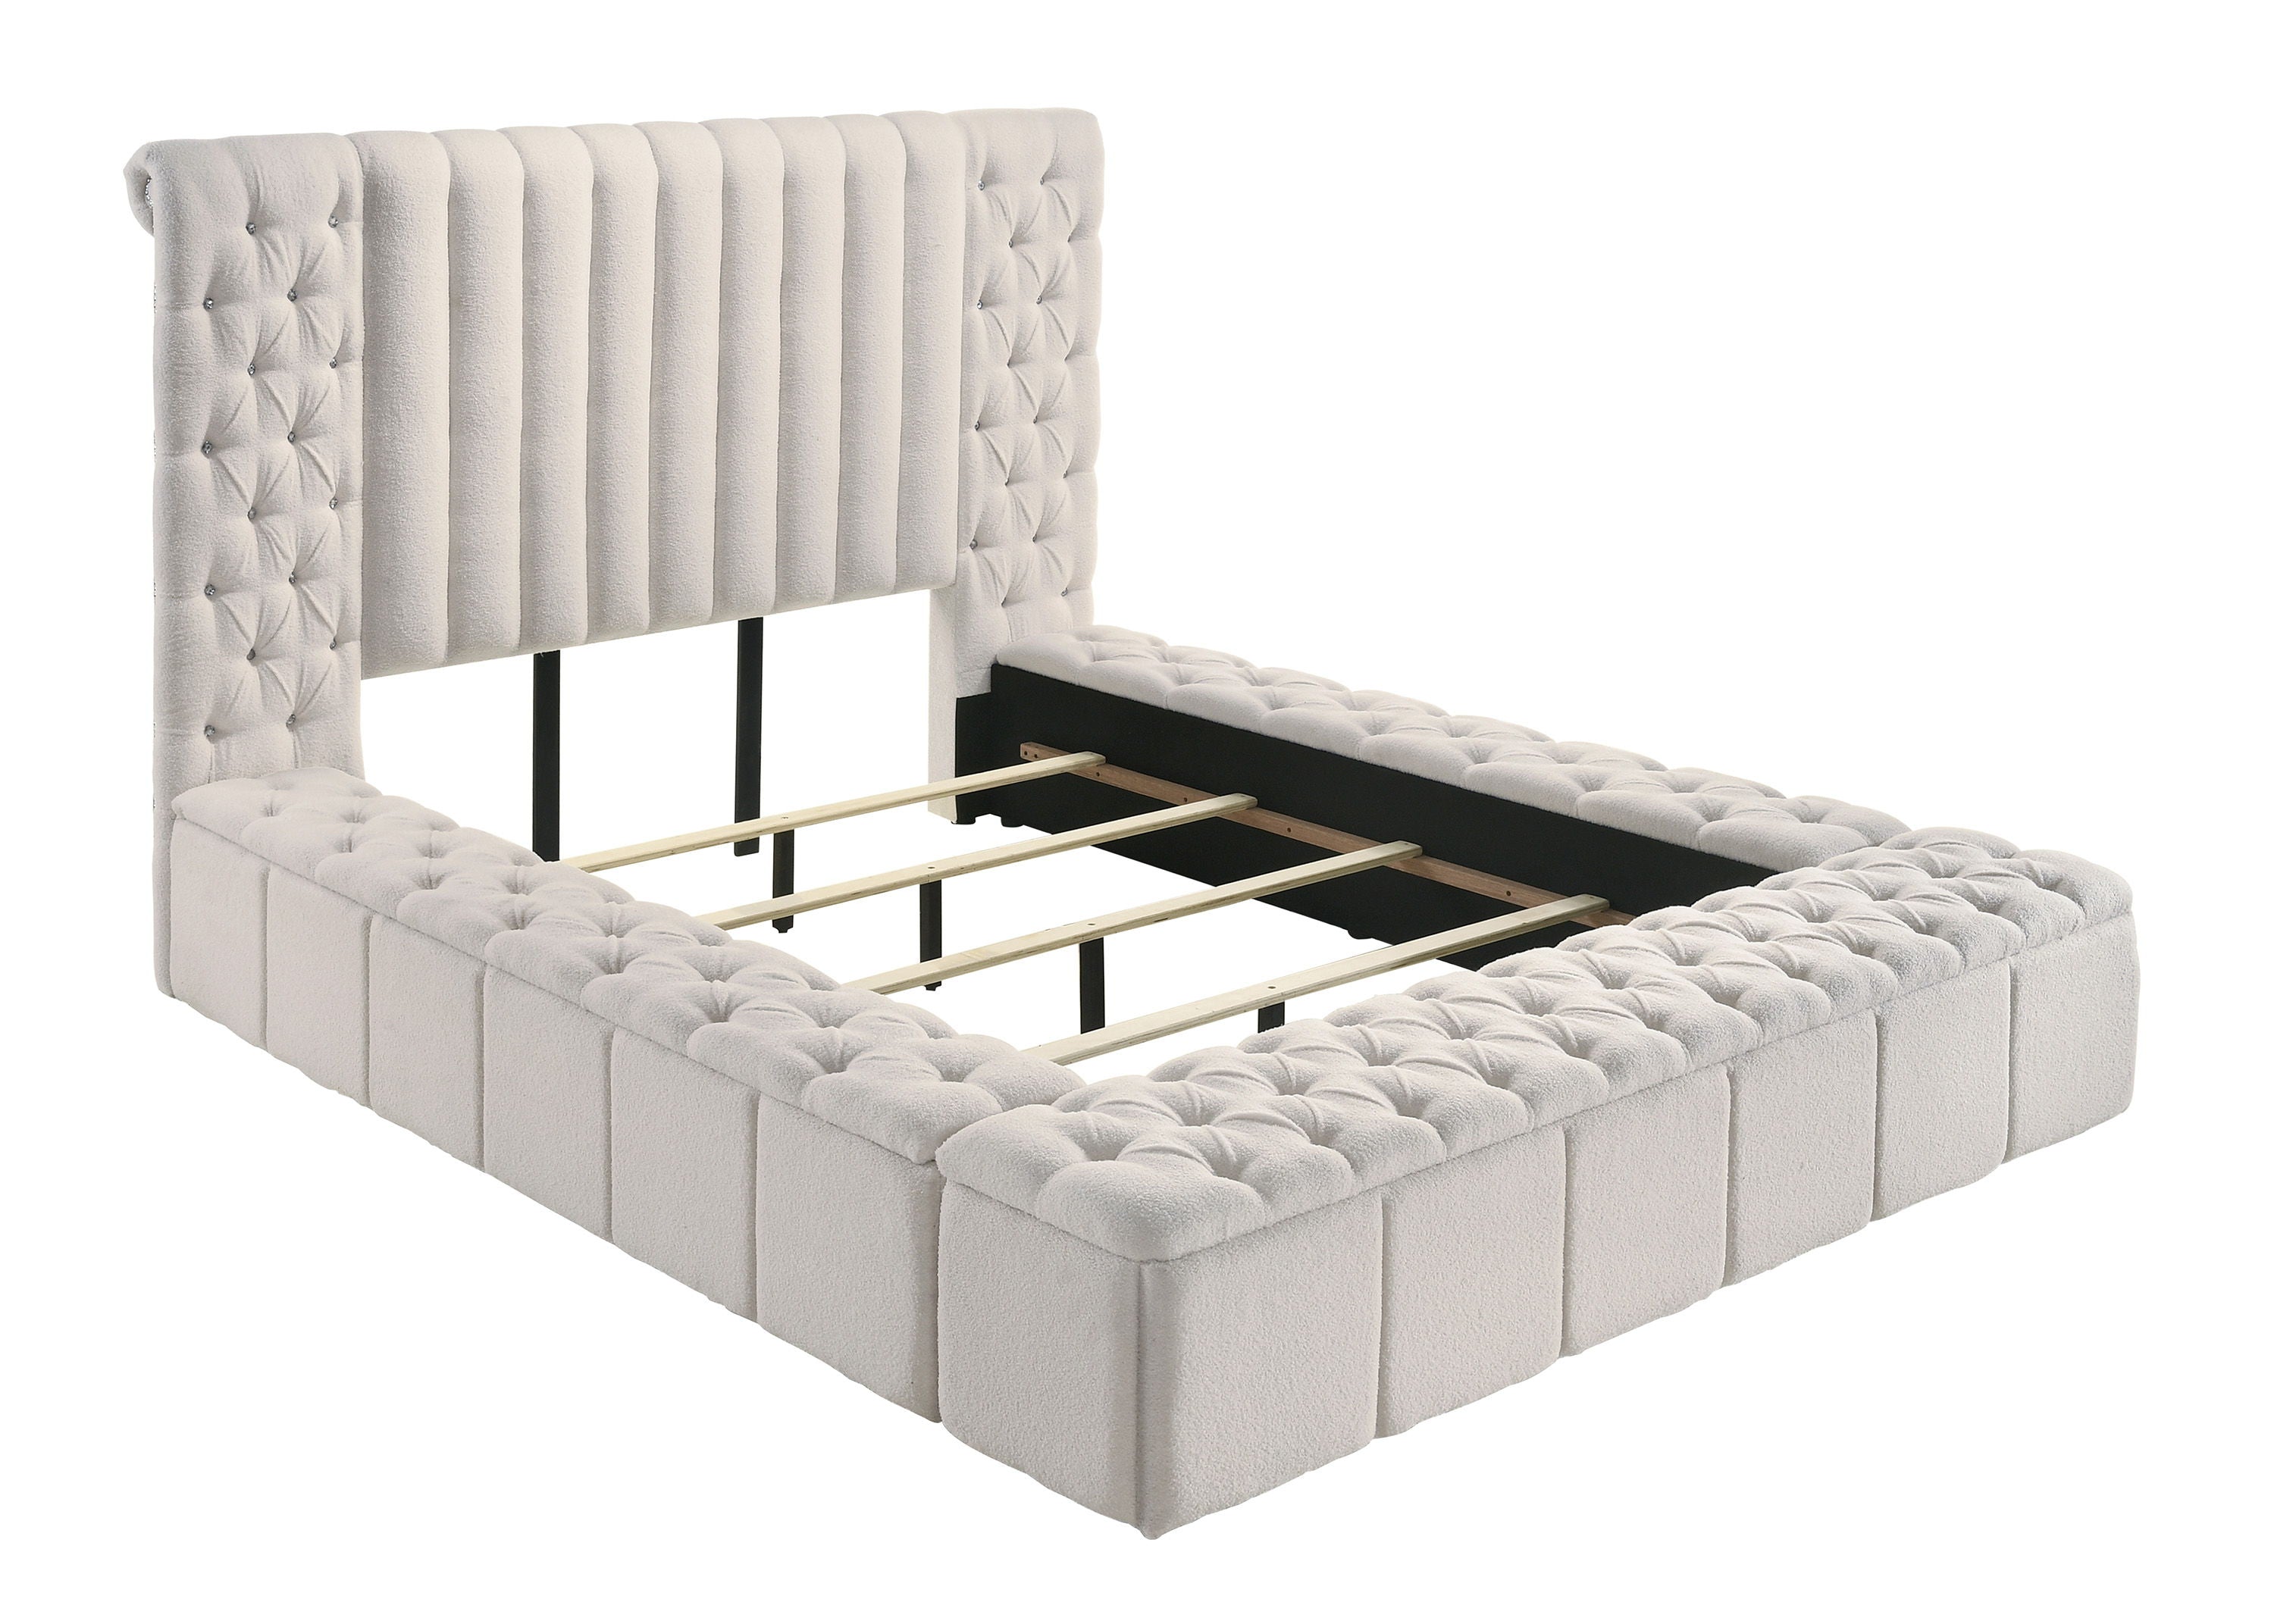 Danbury - Queen Bed With Storage - White